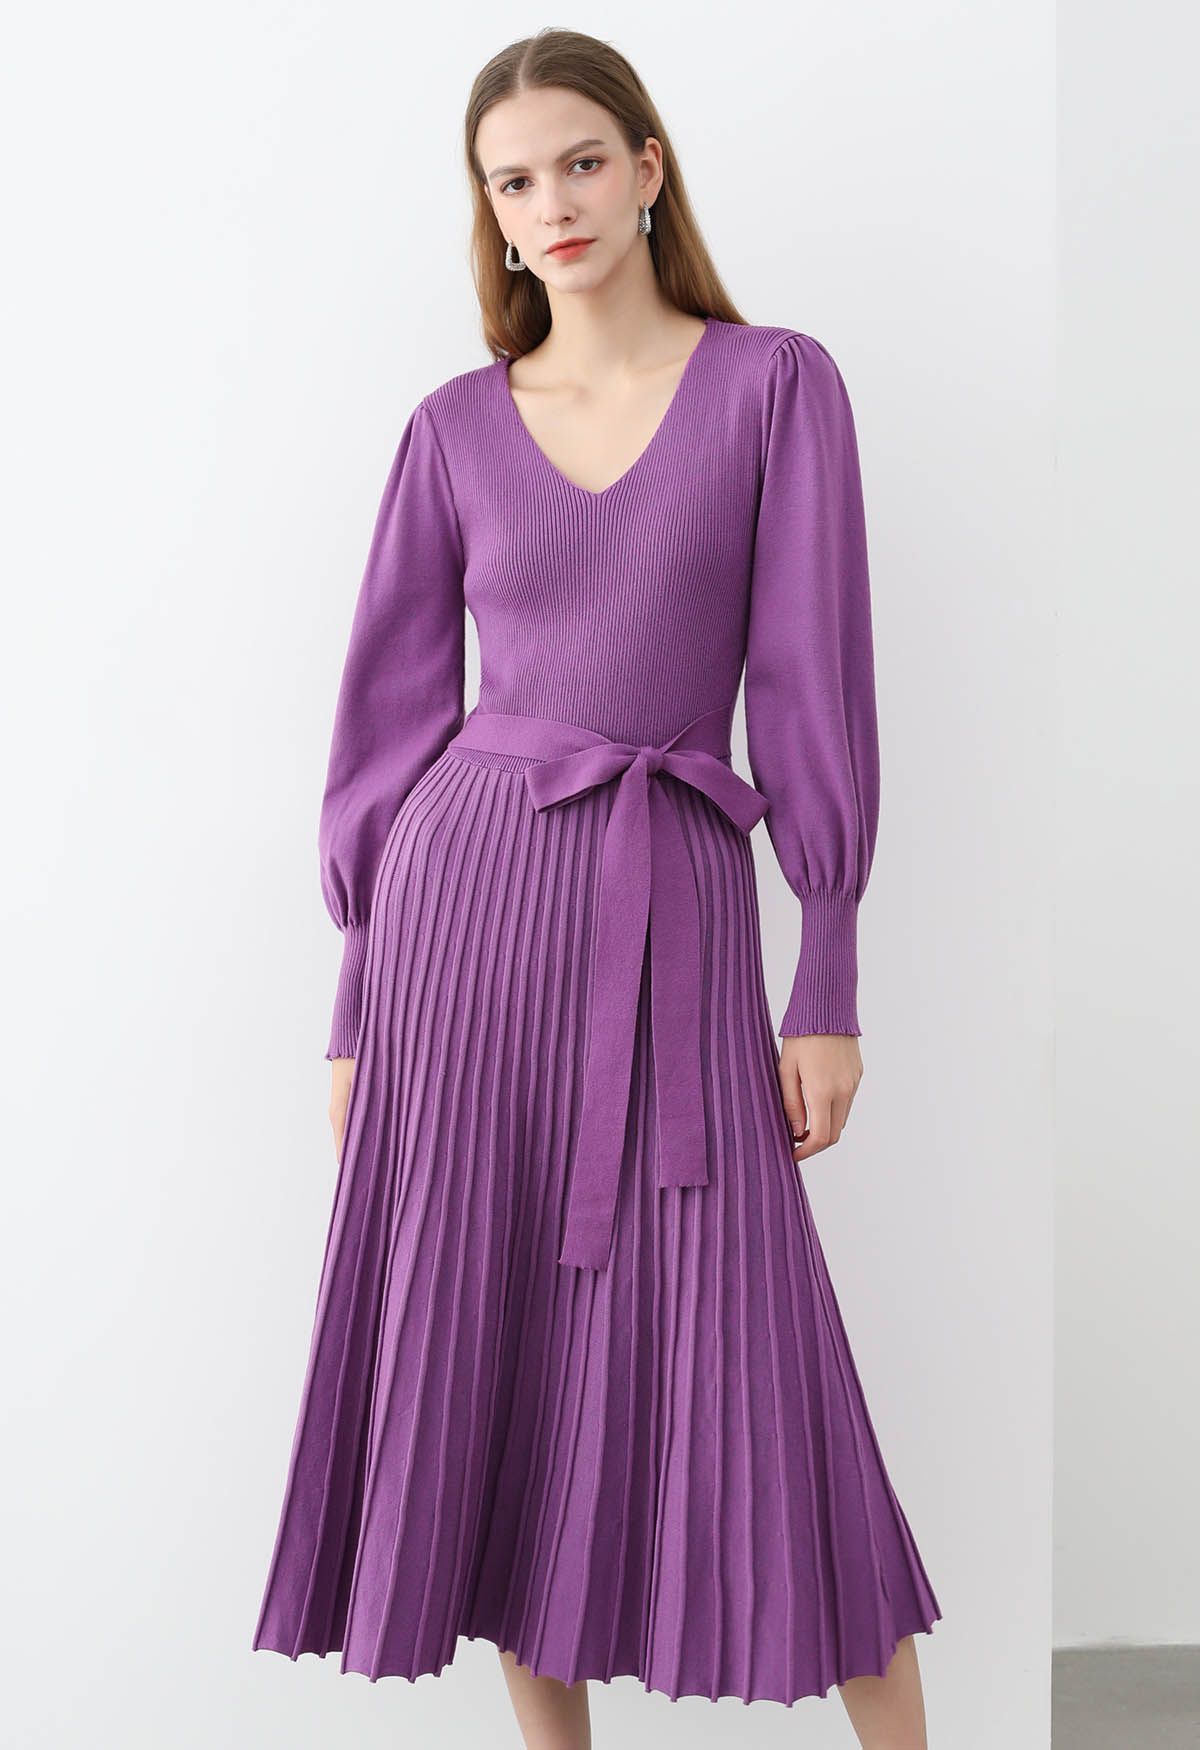 Captivating V-Neck Tie Waist Pleated Knit Dress in Purple | Chicwish